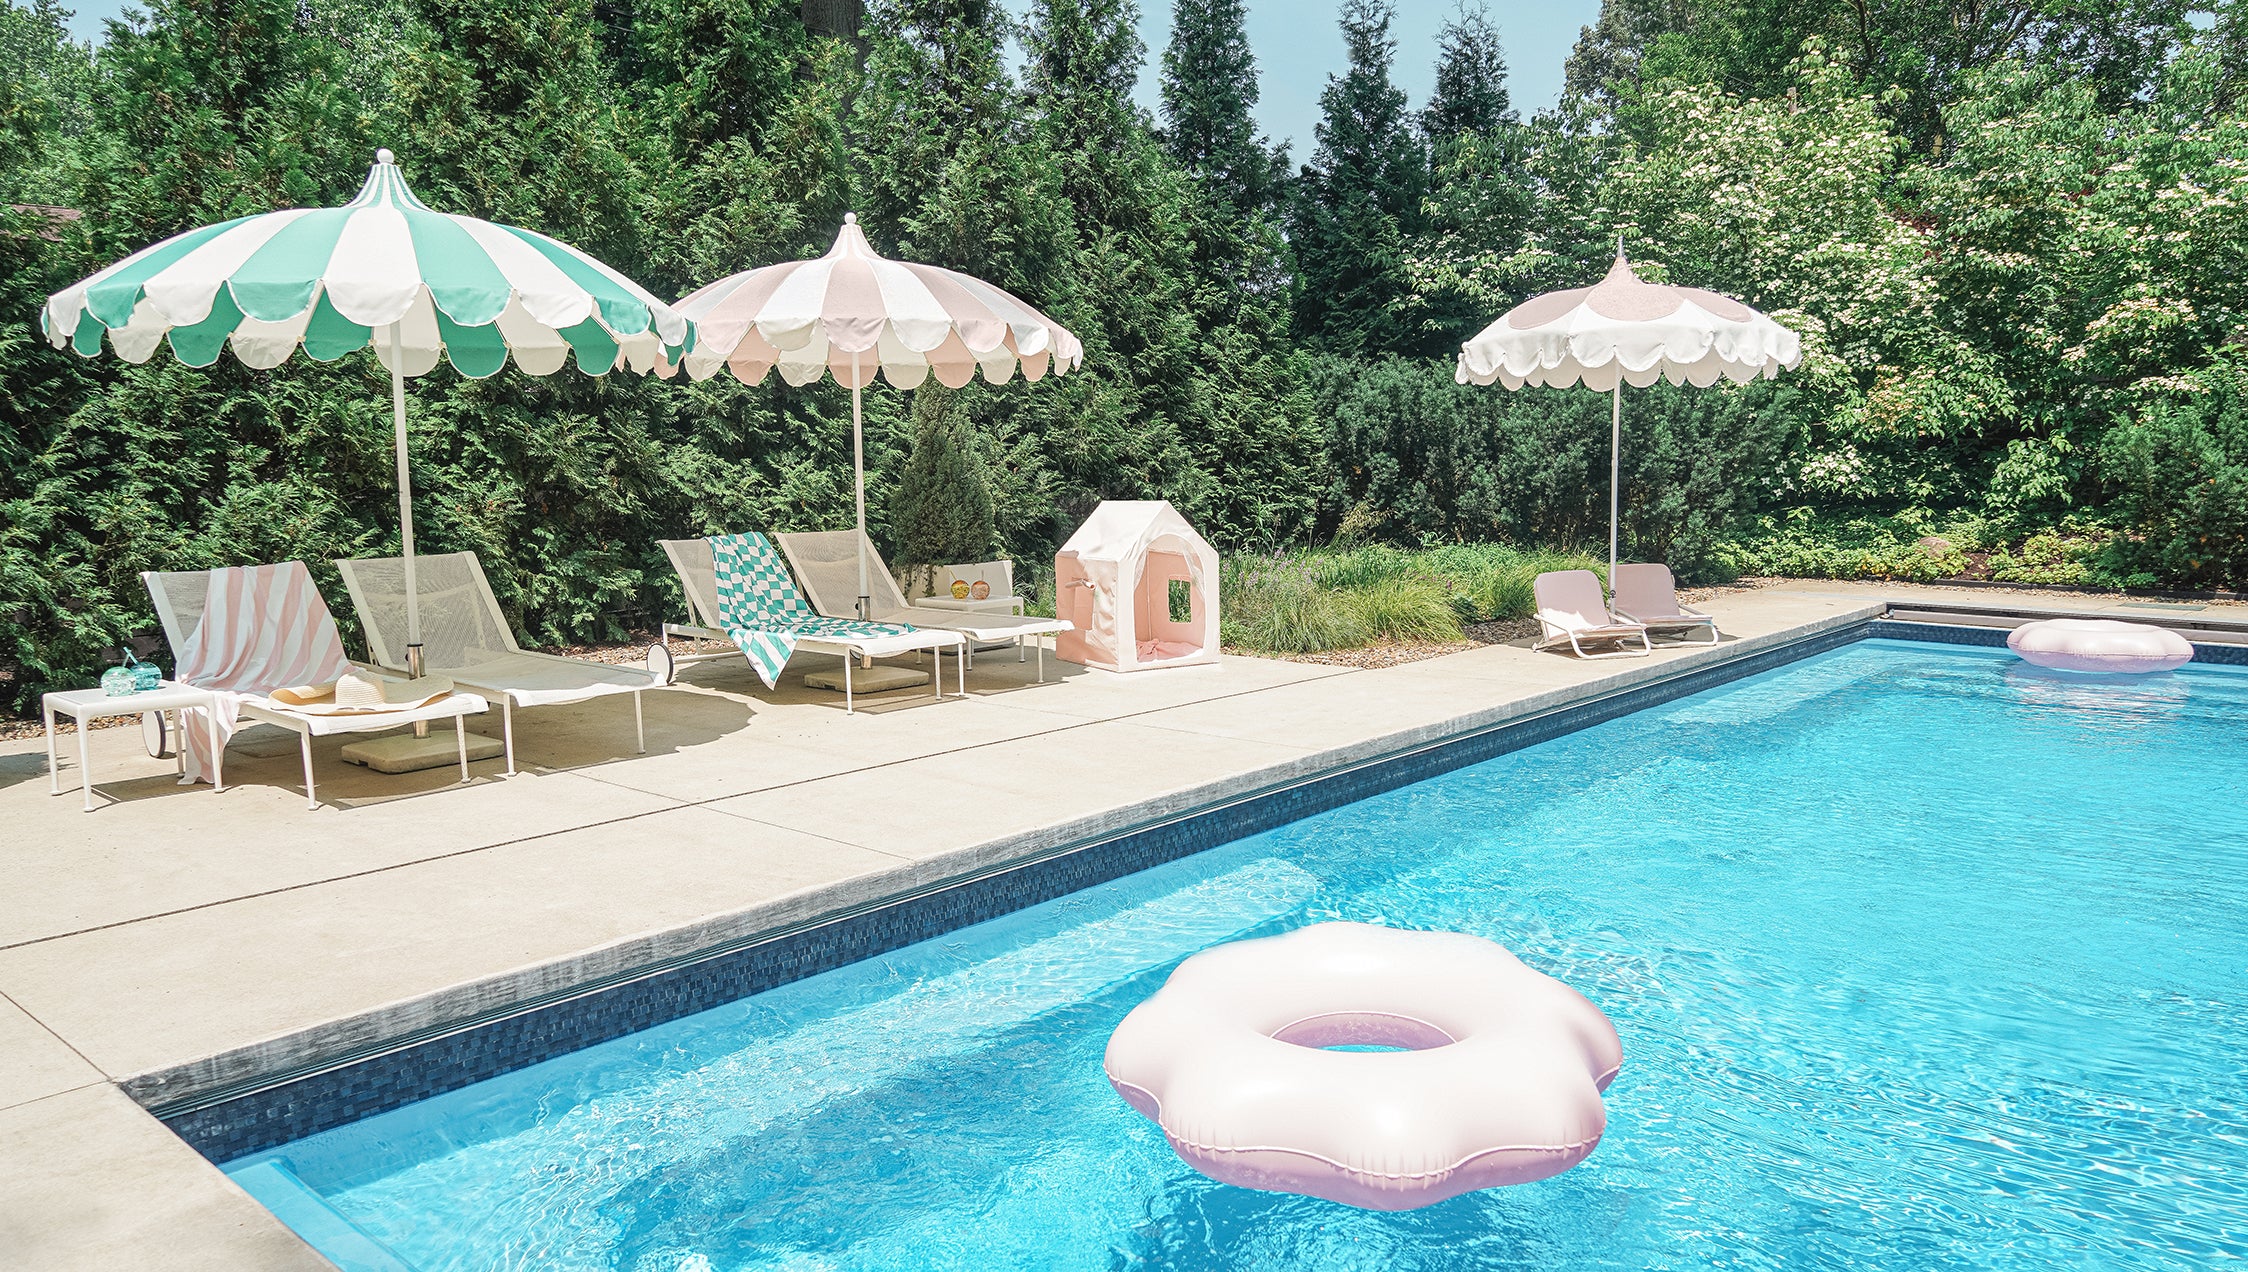 Summer Club Inflatable 5.5ft 3 Ring Adult Pool- Garden of Blossoms Print 